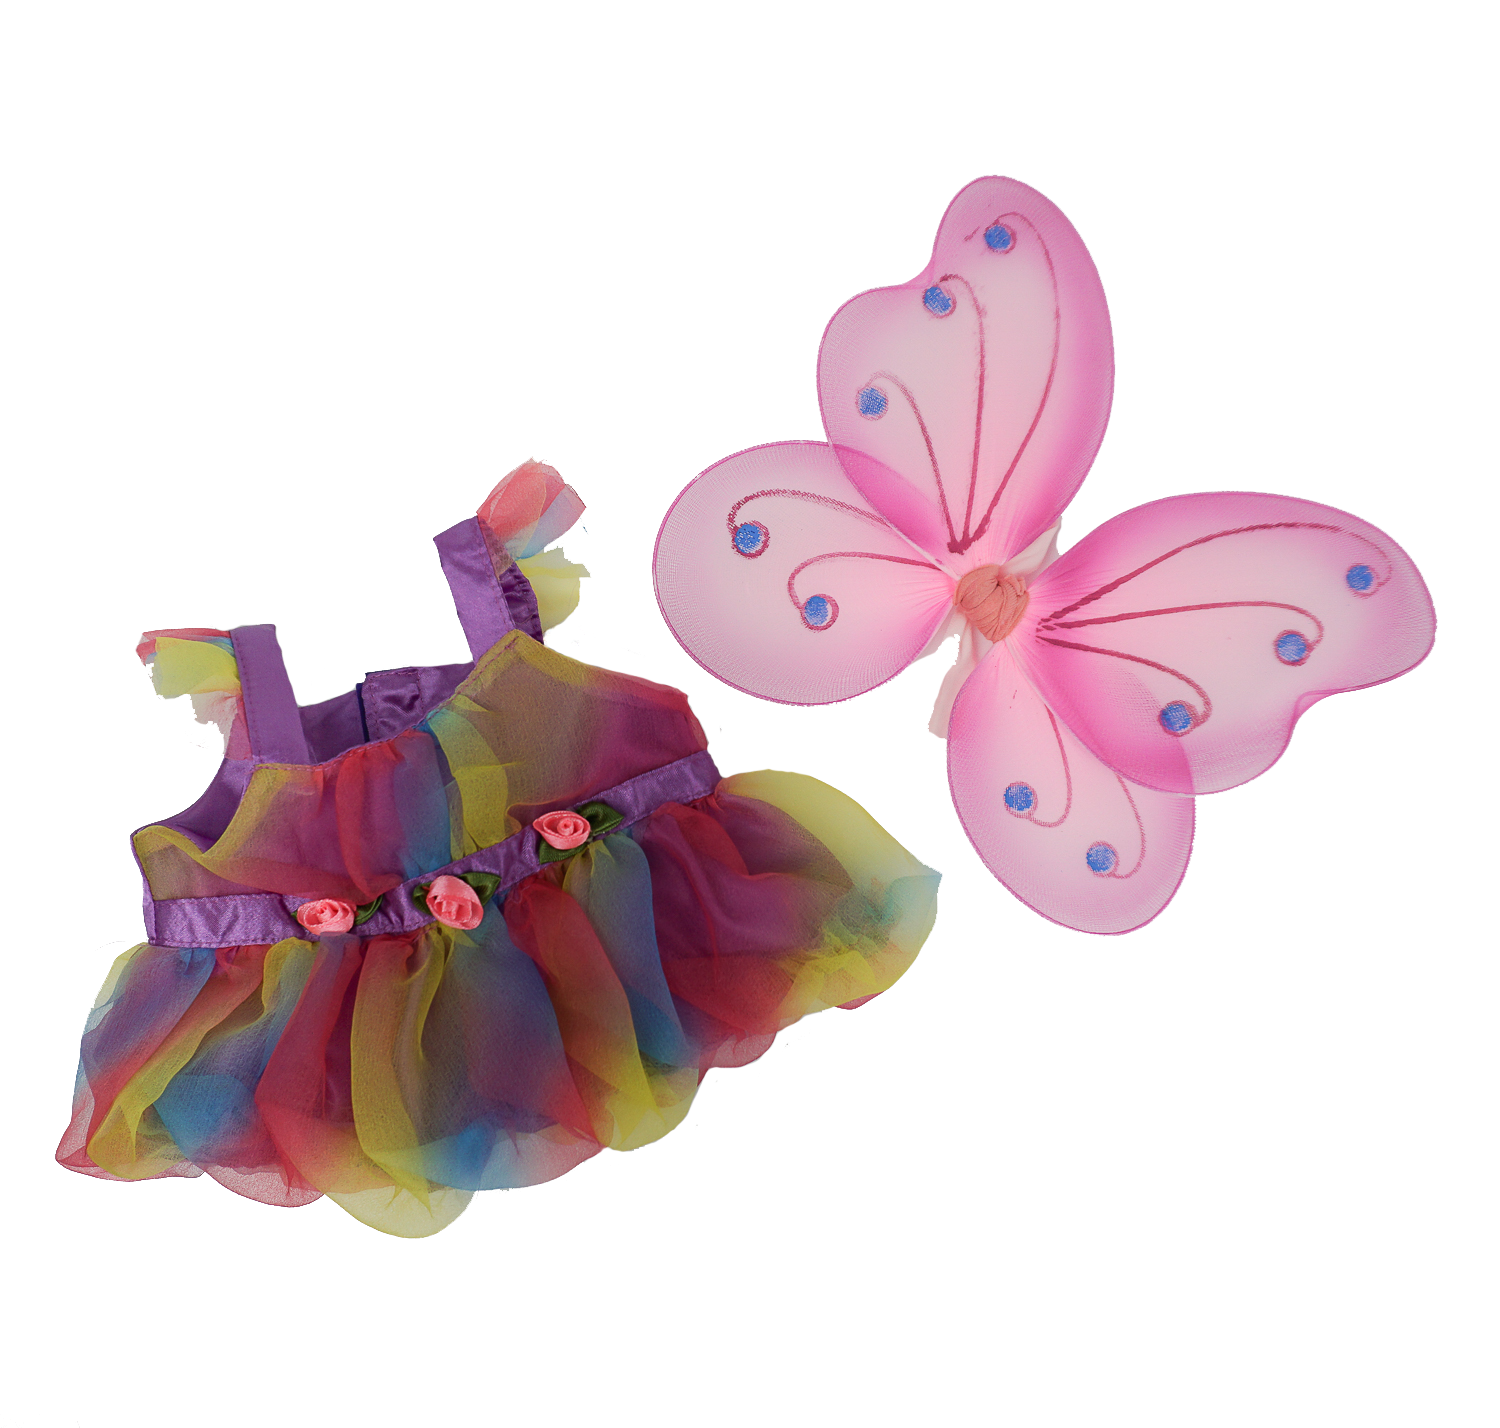 Teddy bear fairy butterfly costume for 16" stuffed animals from the Frannie and Friends collection